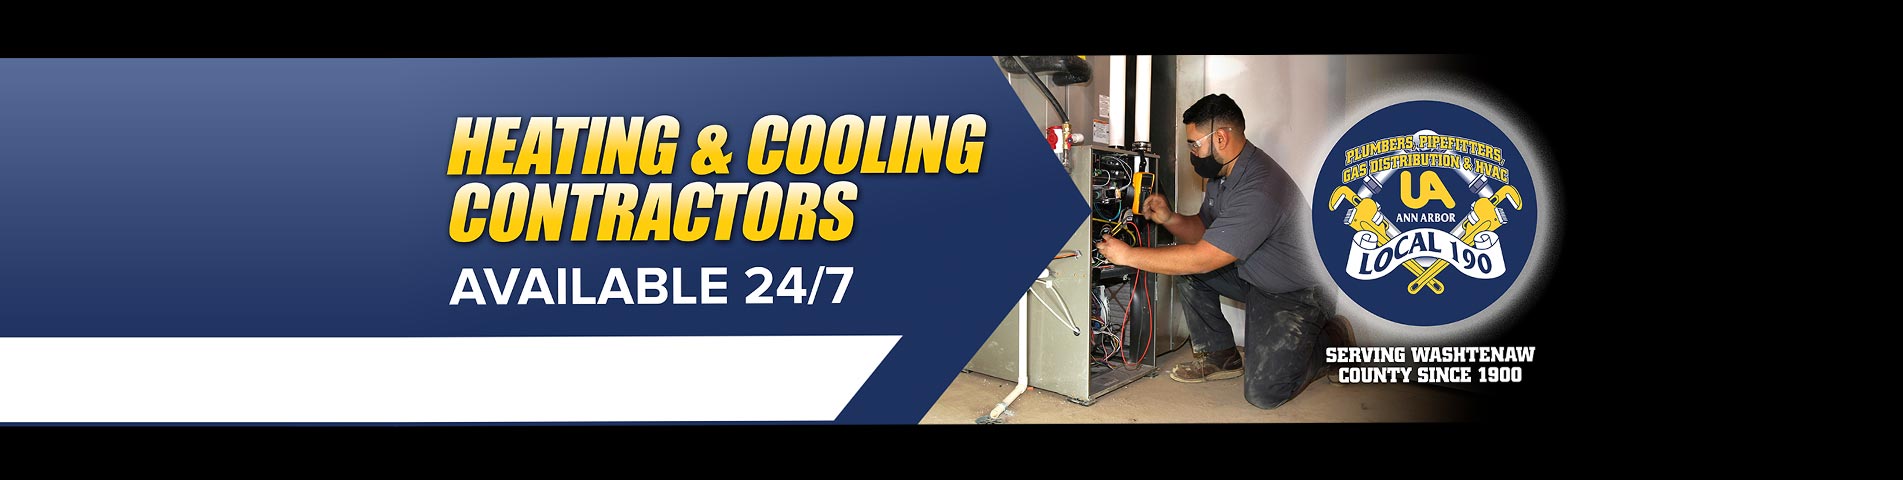 Heating and Cooling contractors